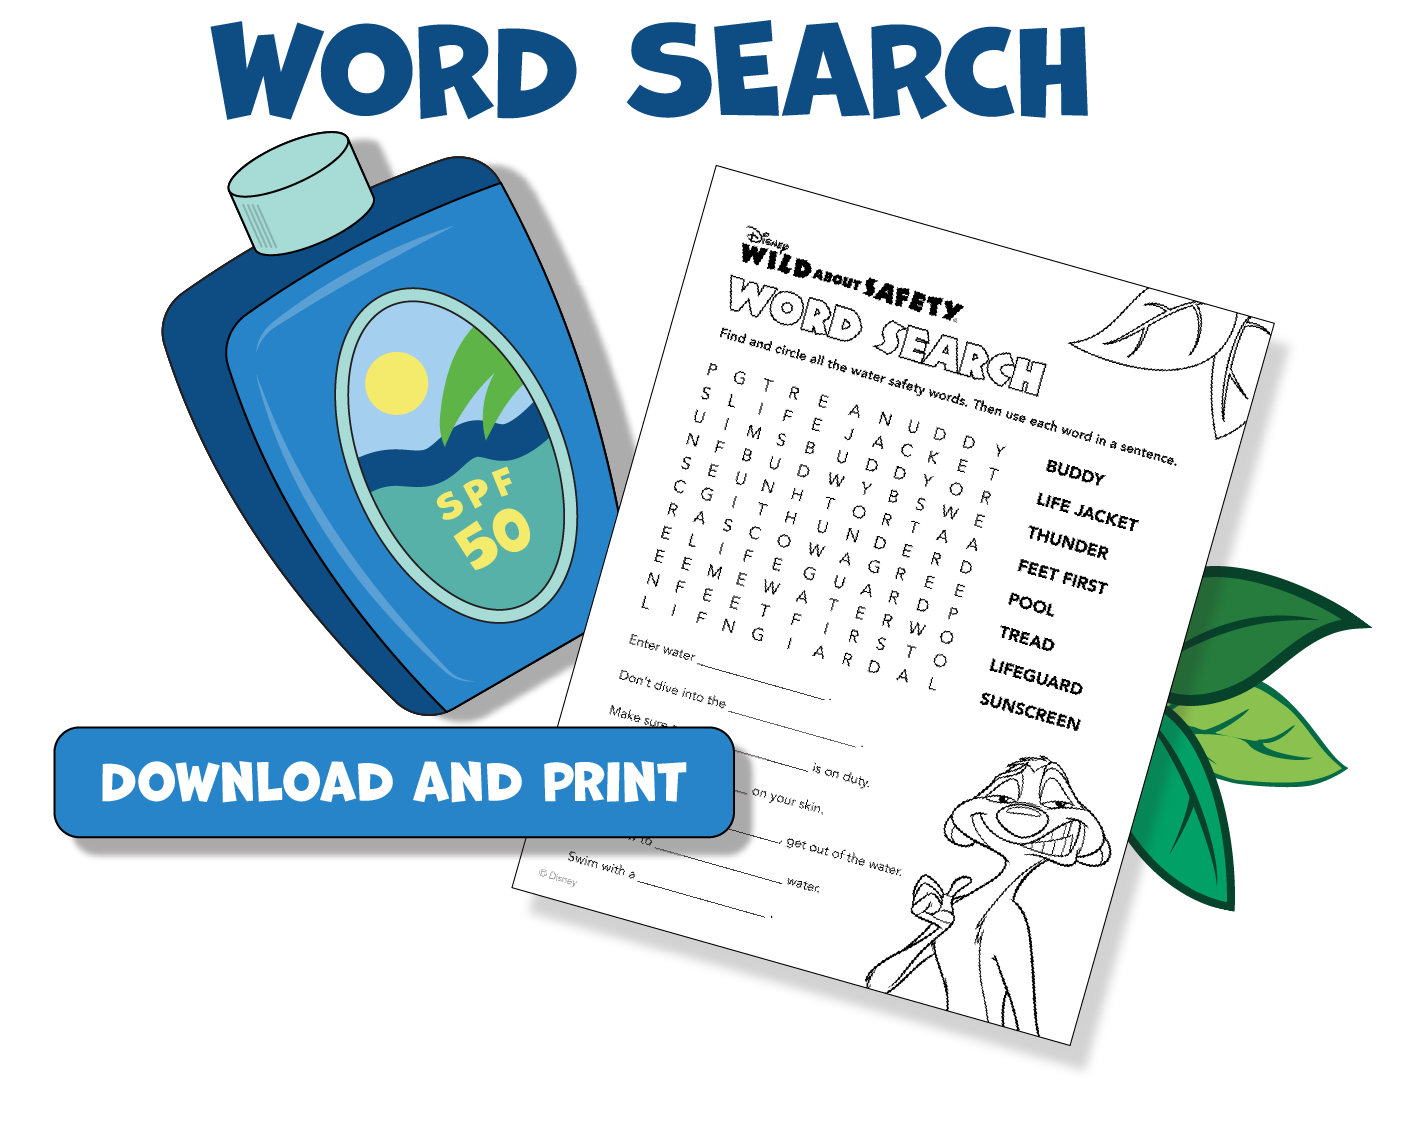 Download and print "Word Search" activity sheet